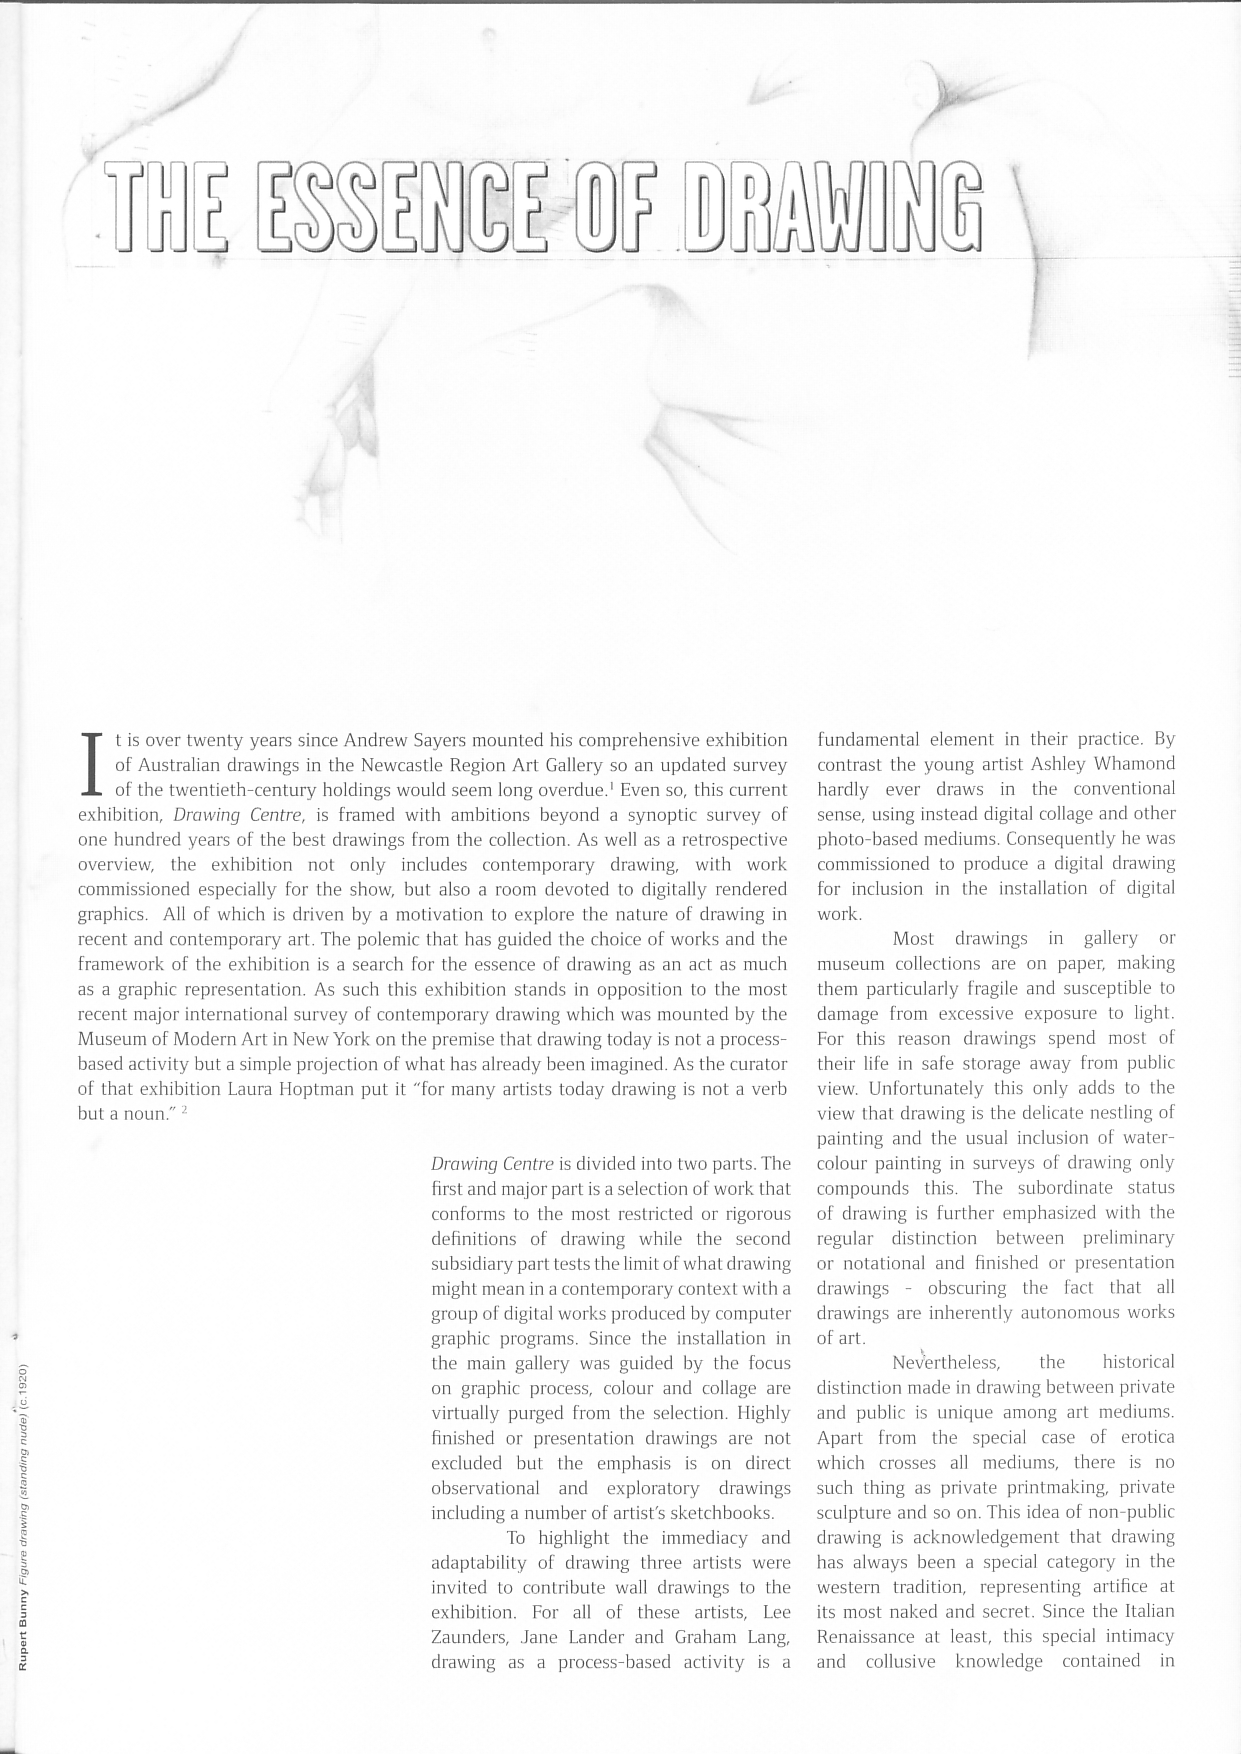 DrawingCentre-essay (1)_Page_1.jpg